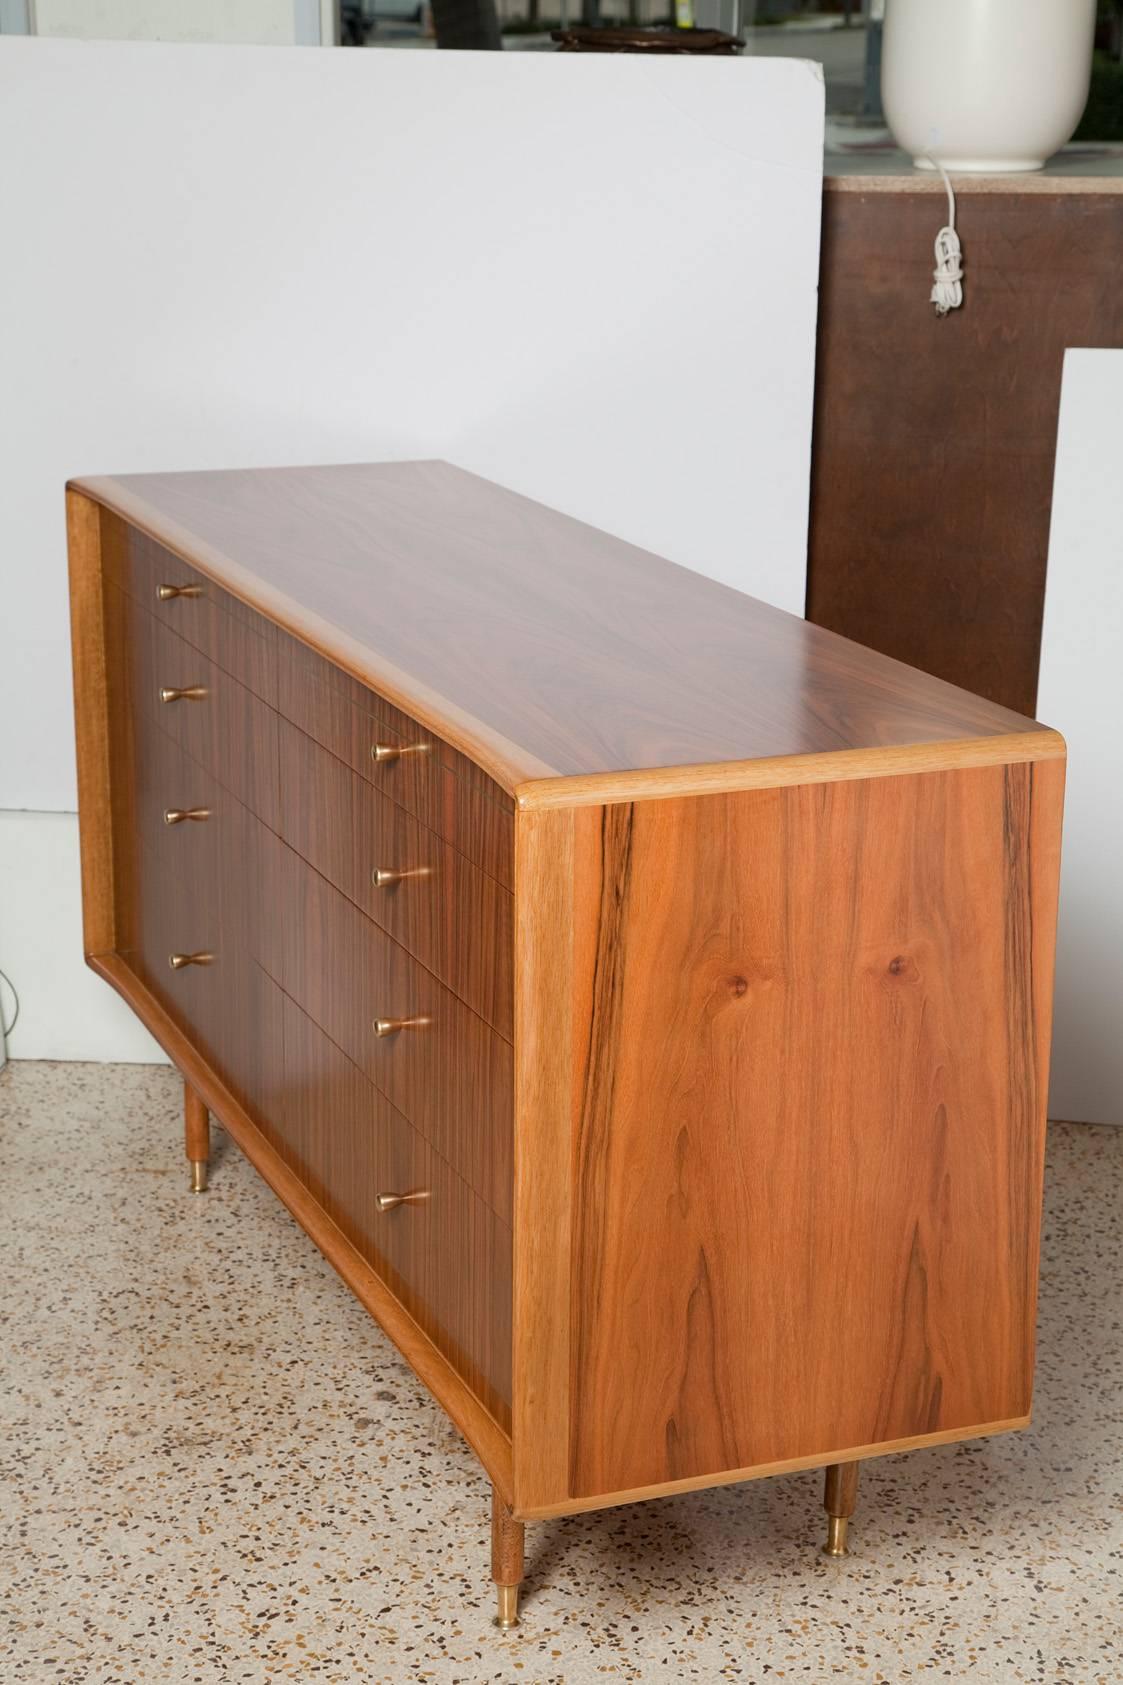 Fully restored 1960s Italian walnut dresser by Erno Fabry with solid brass hardware and inlays on drawer fronts.